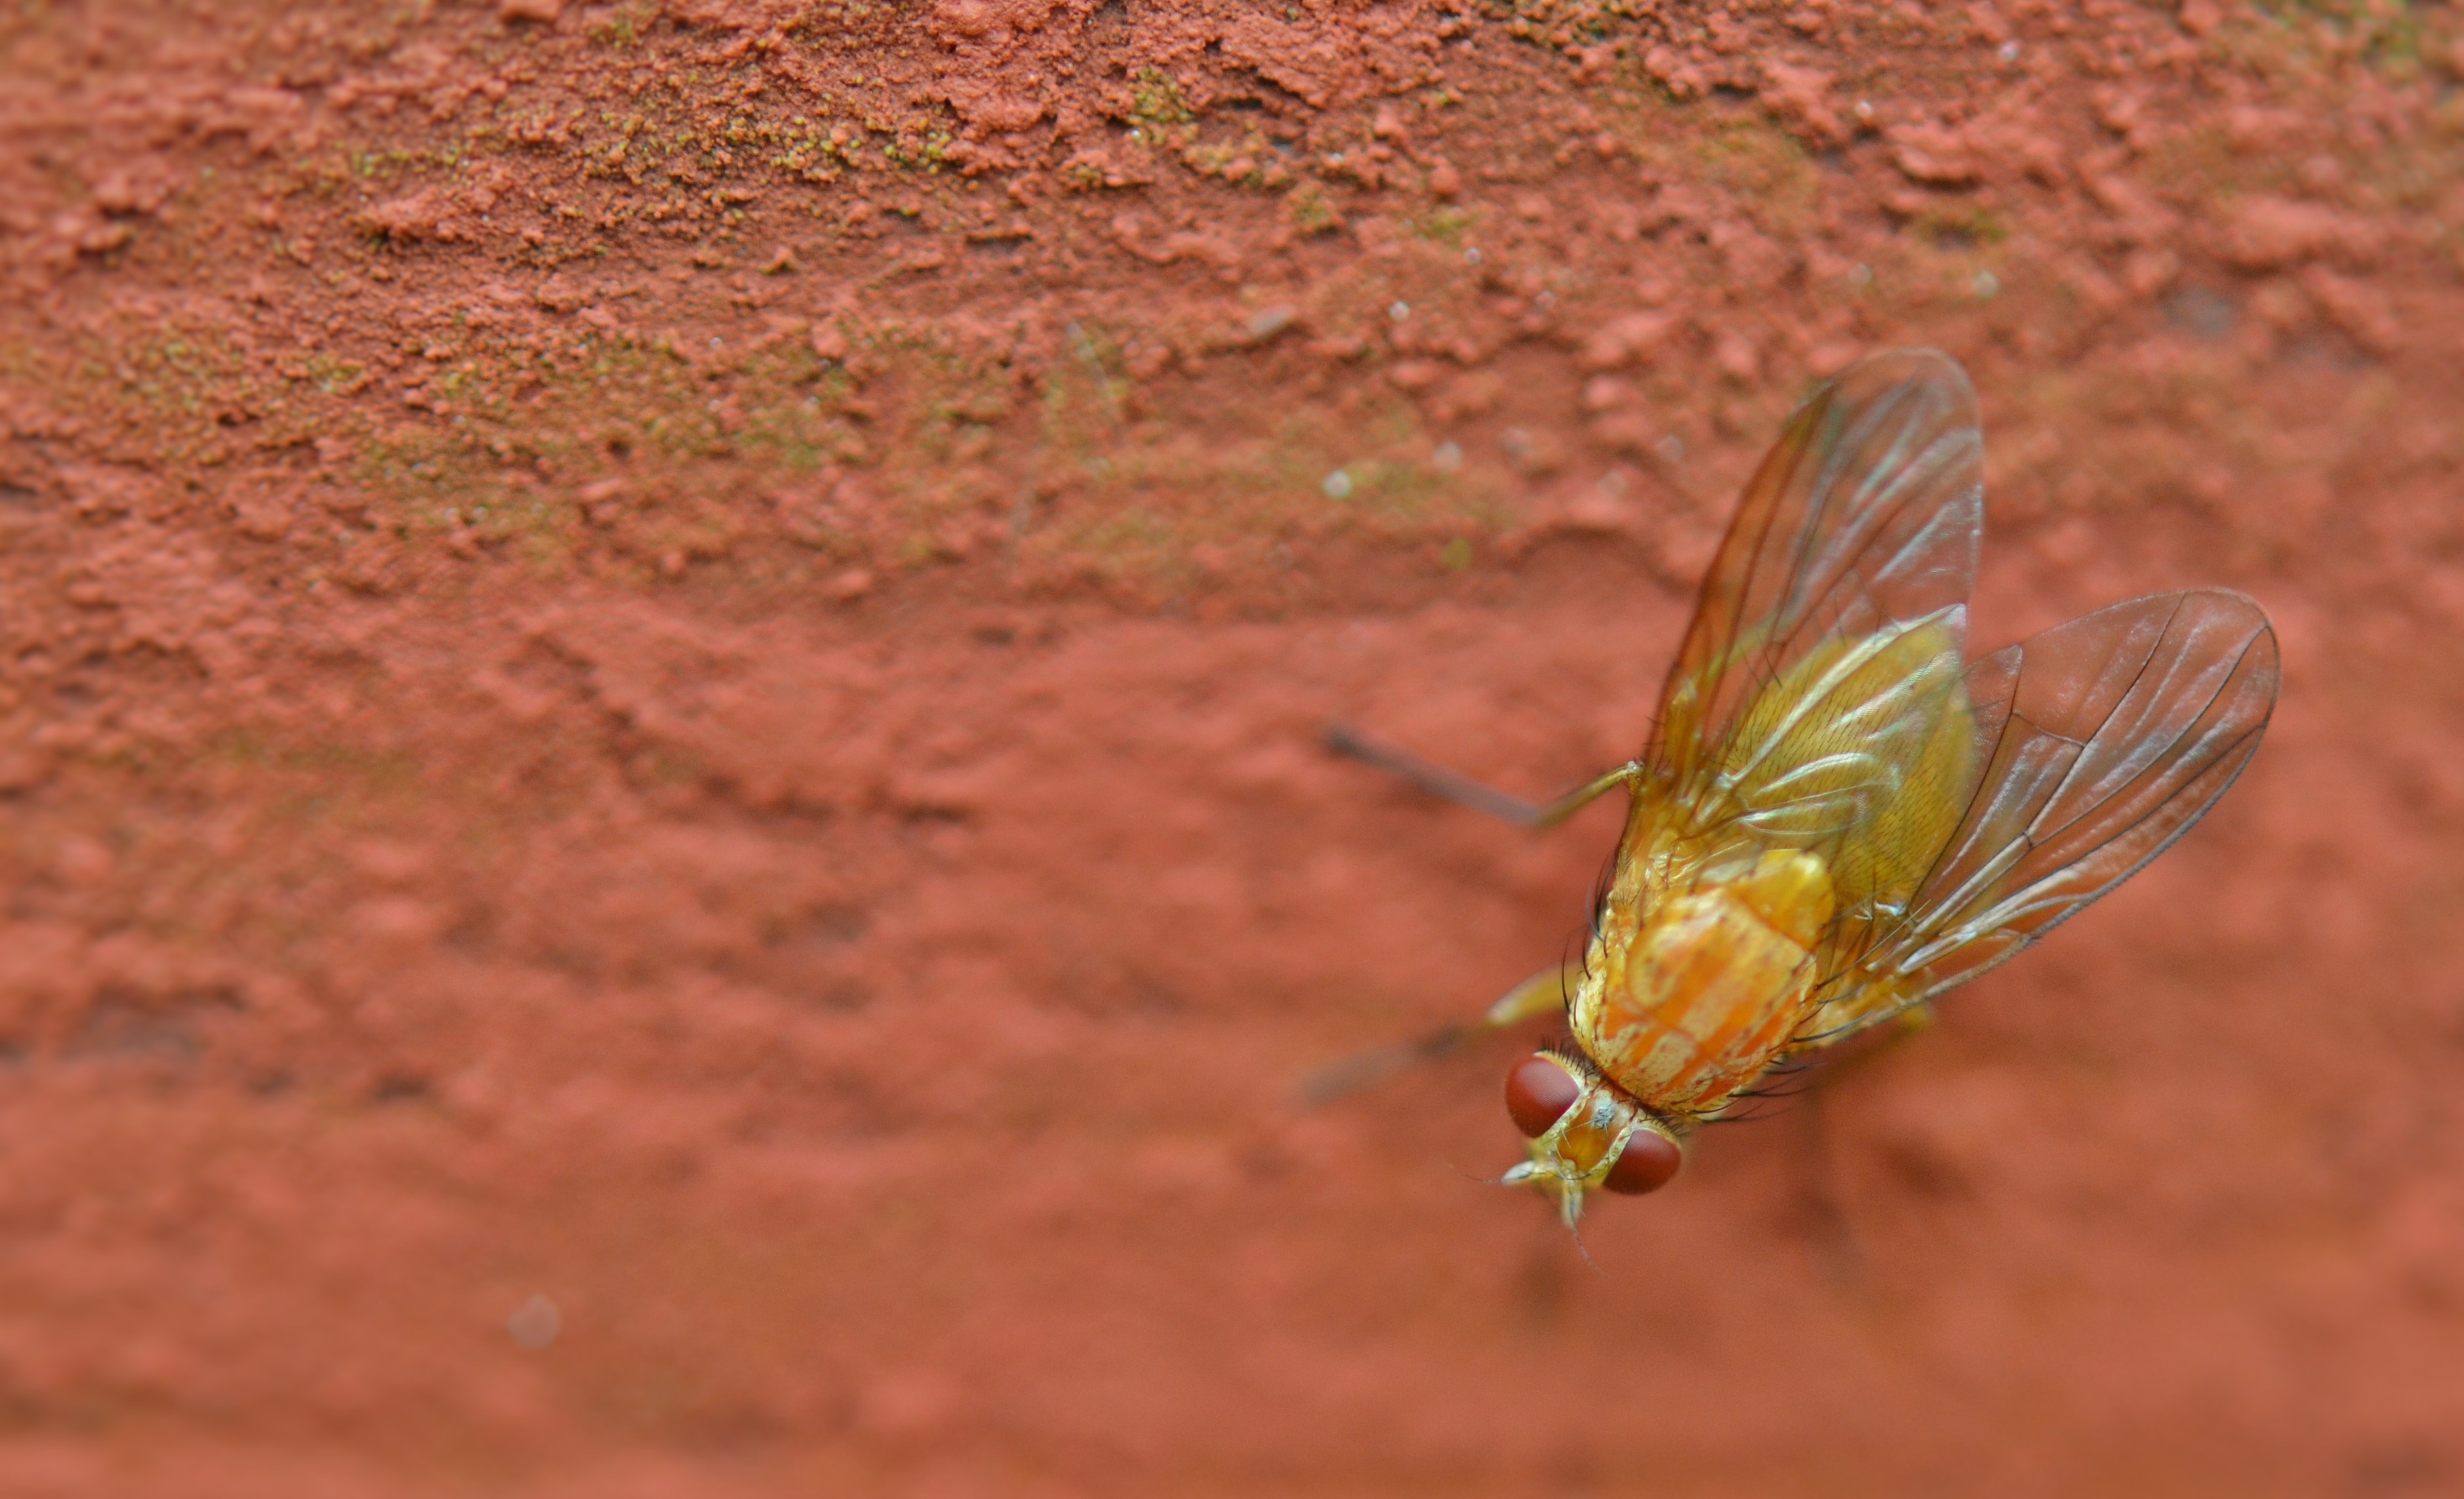 yellow winged insect during daytime